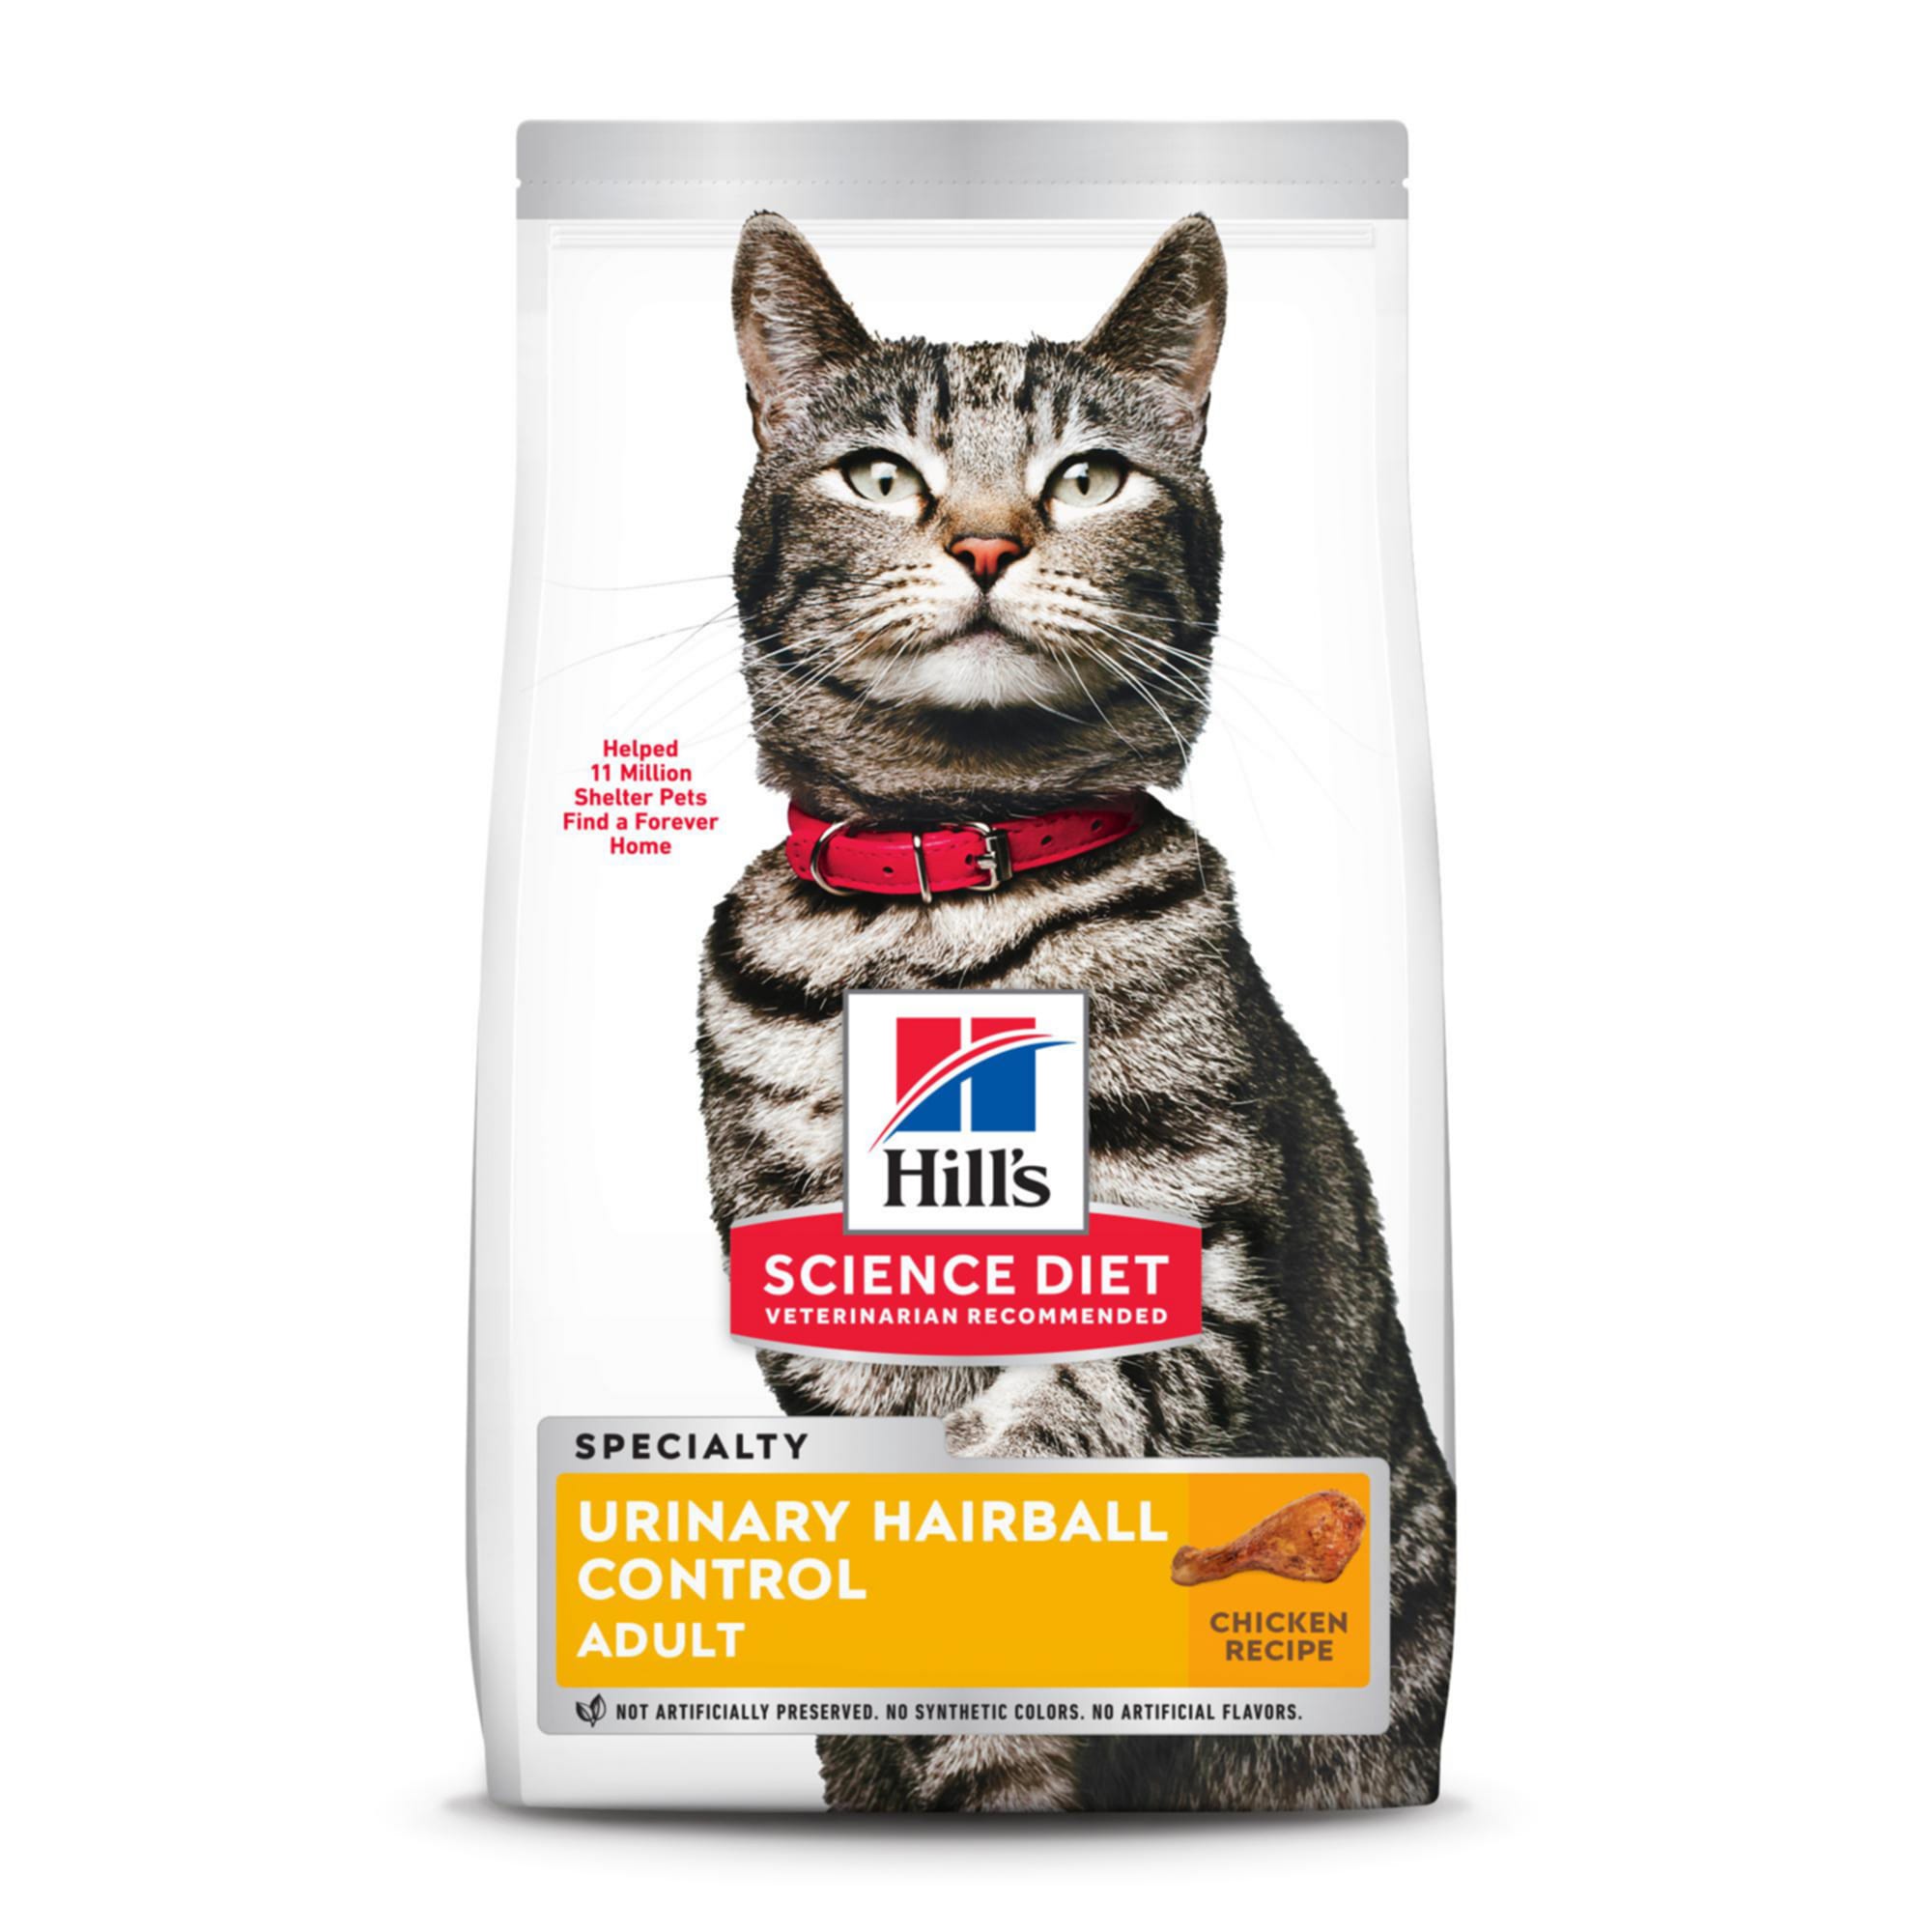 hill's science diet adult urinary hairball control cat food